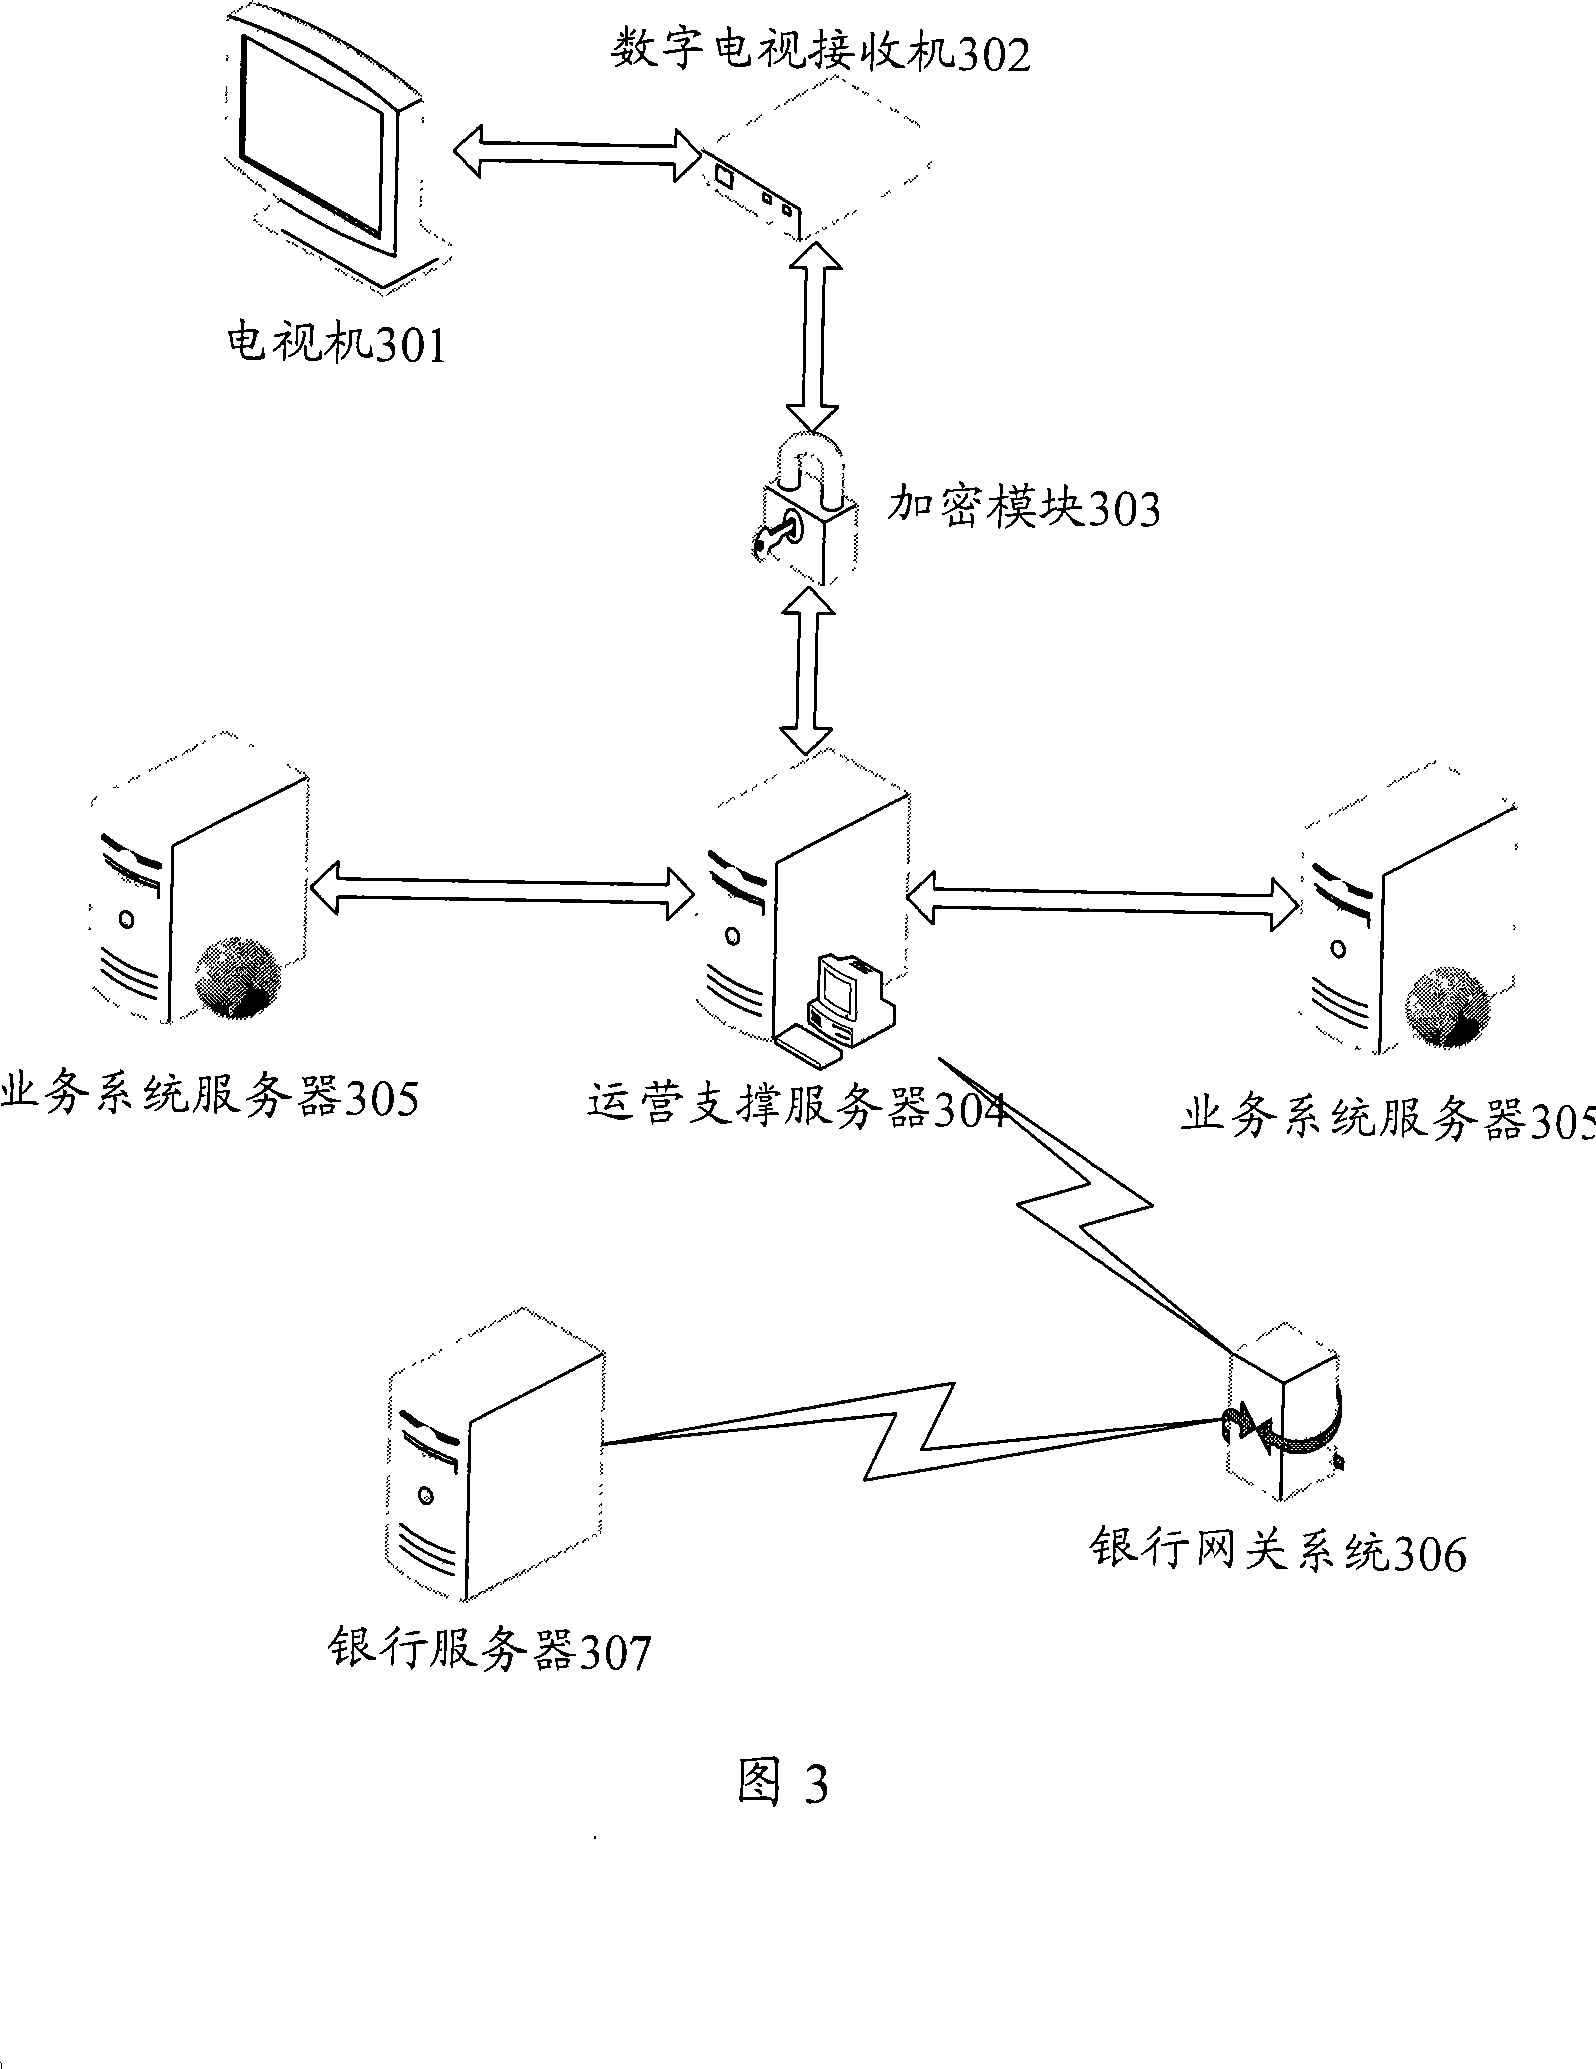 Server, transport operation system and paying method using digital television system